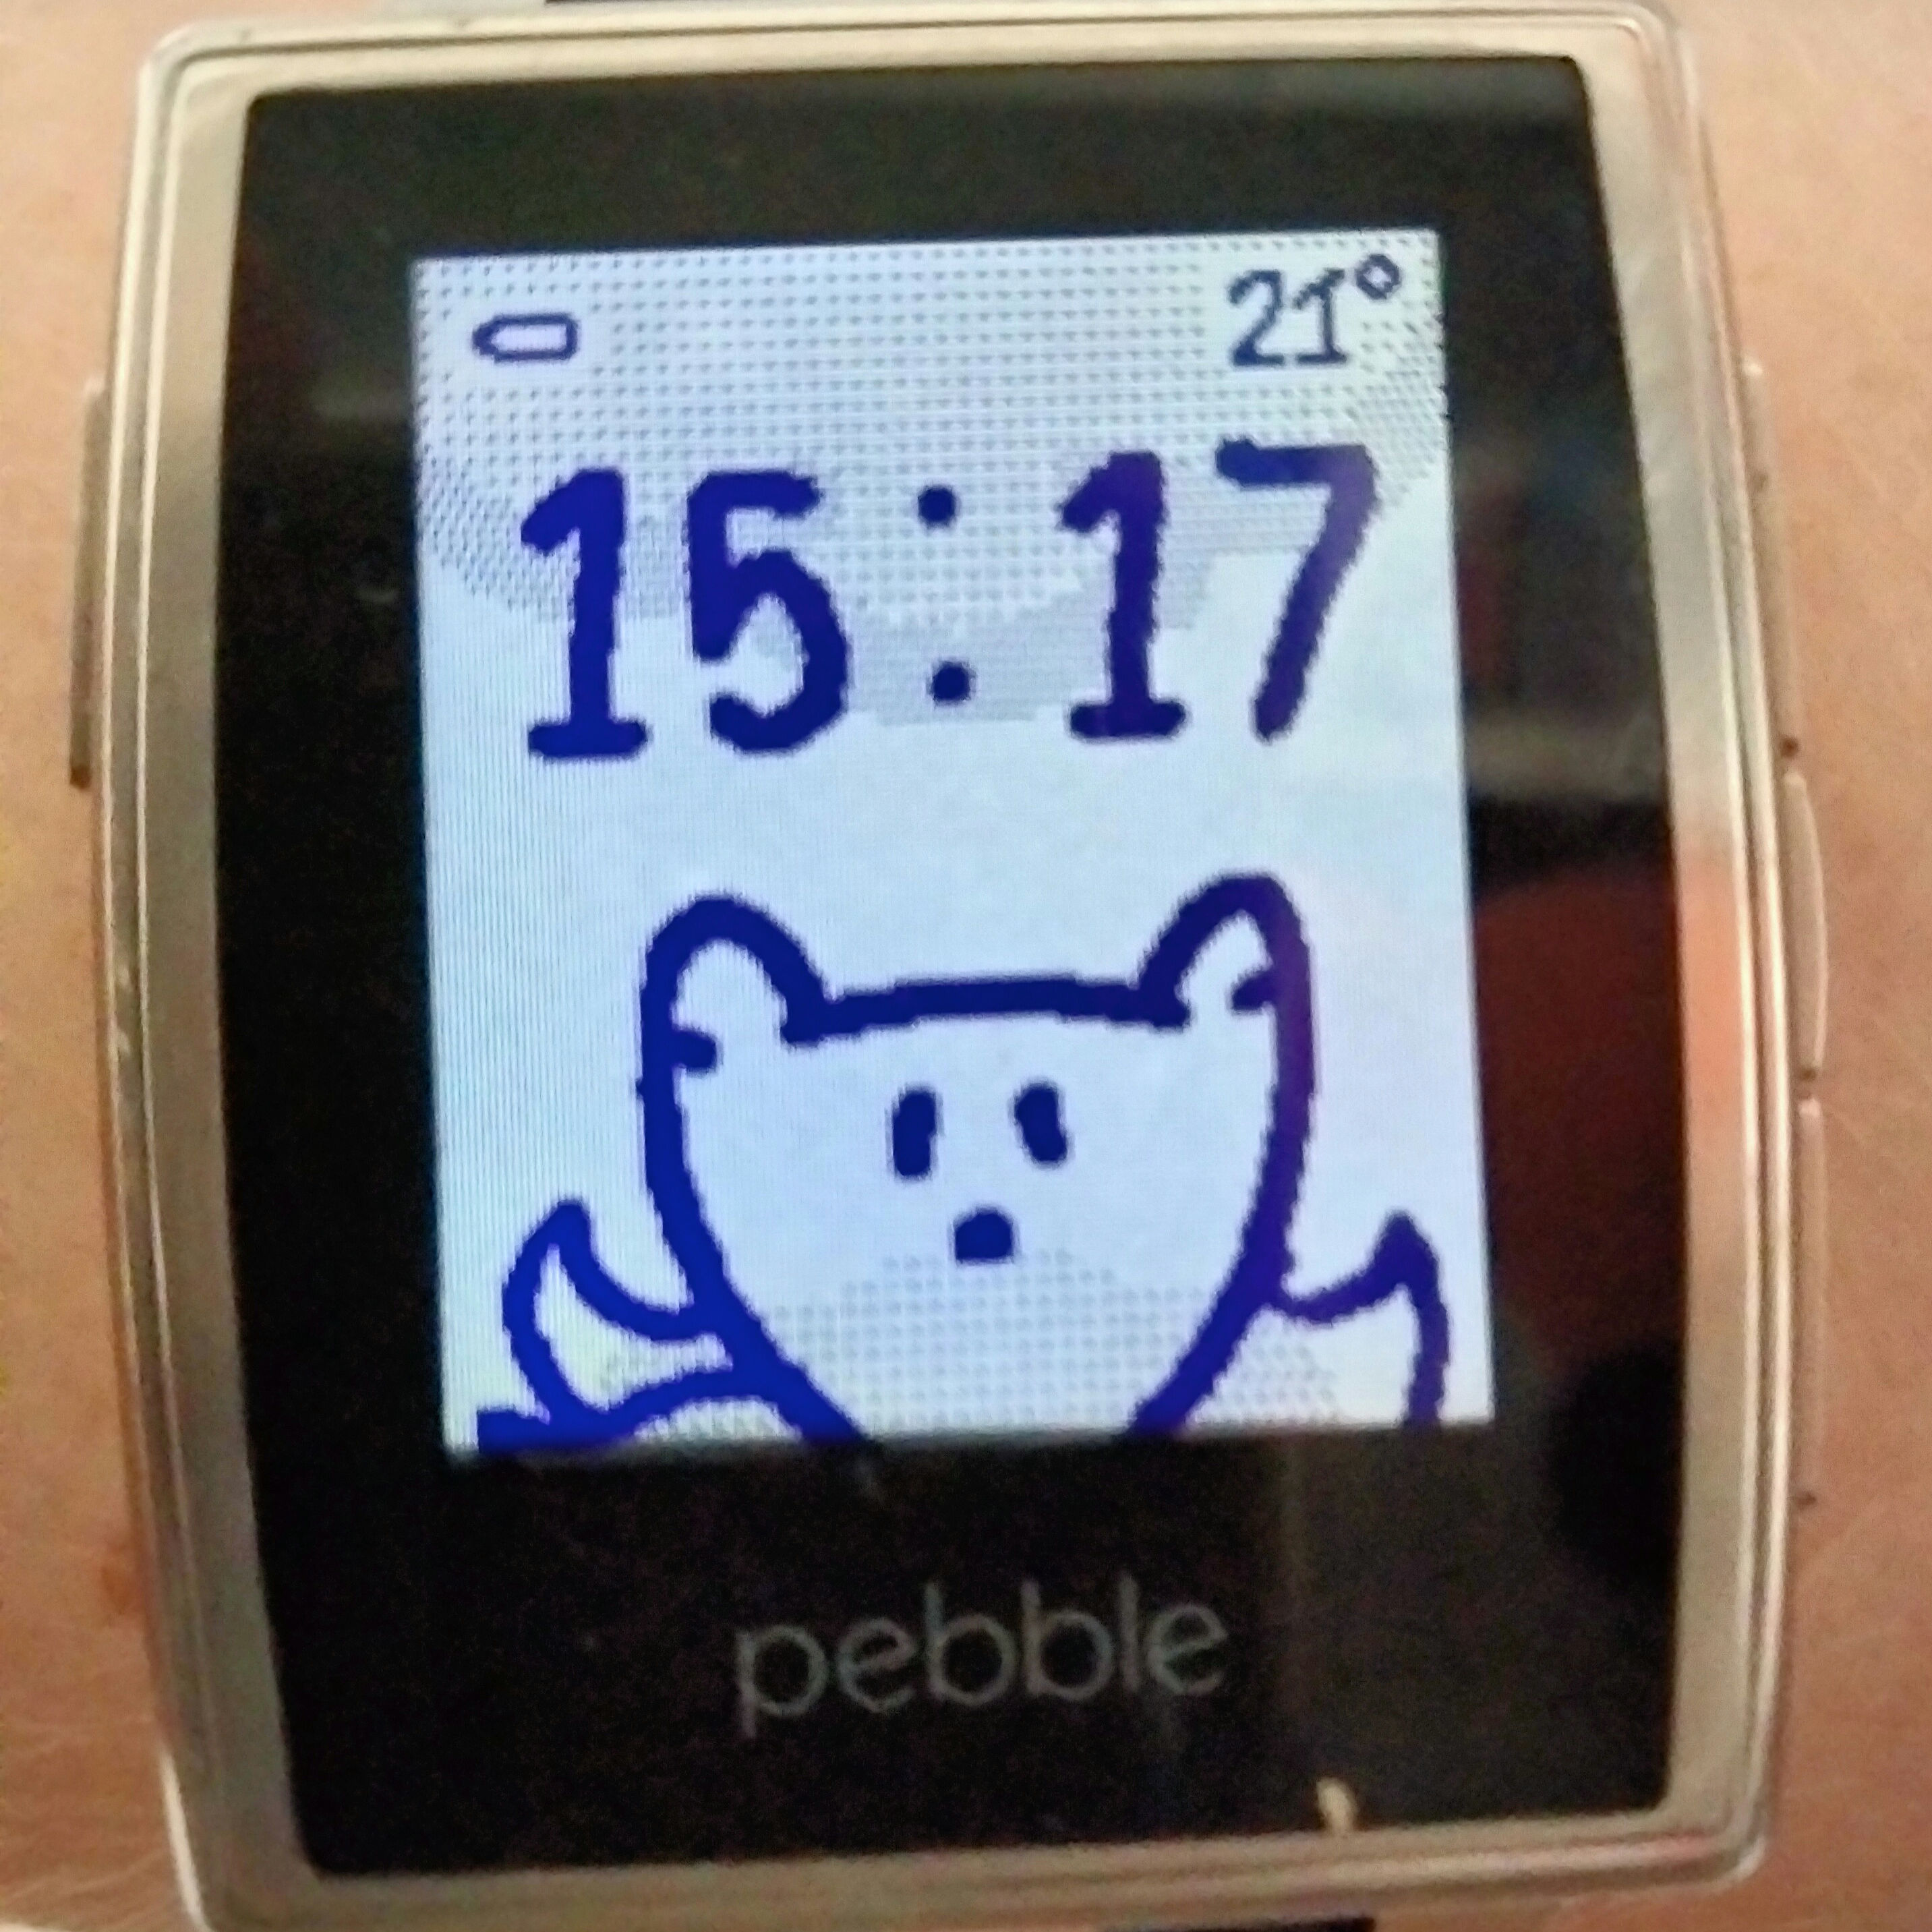 a watchface with a fox showing low battery, 21deg, 15:17, and cloudy